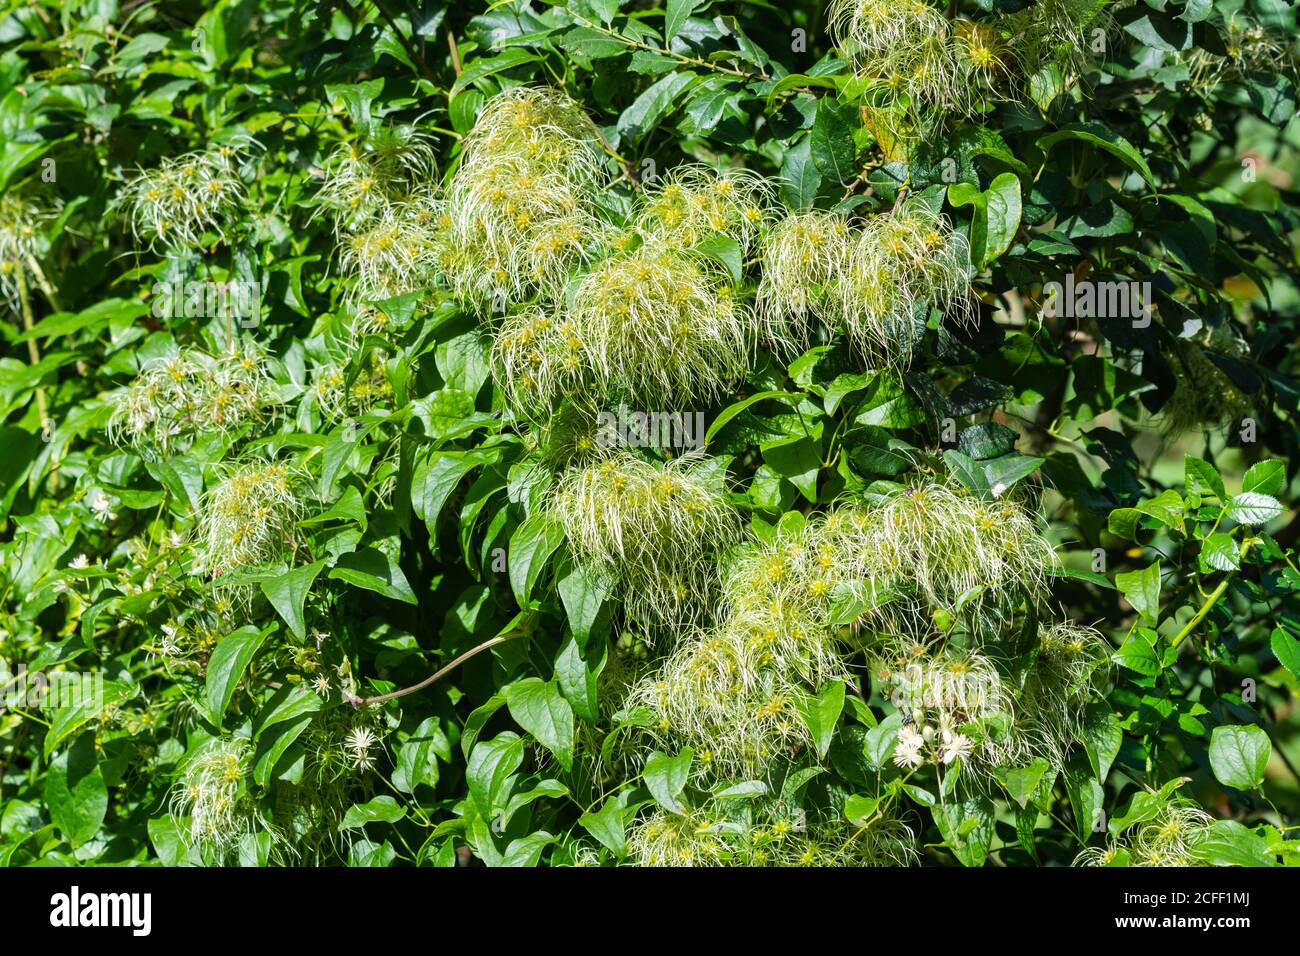 Seed heads of Clematis vitalba shrubs (Old Man's Beard or Traveller's Joy) growing in Summer in the UK. Stock Photo